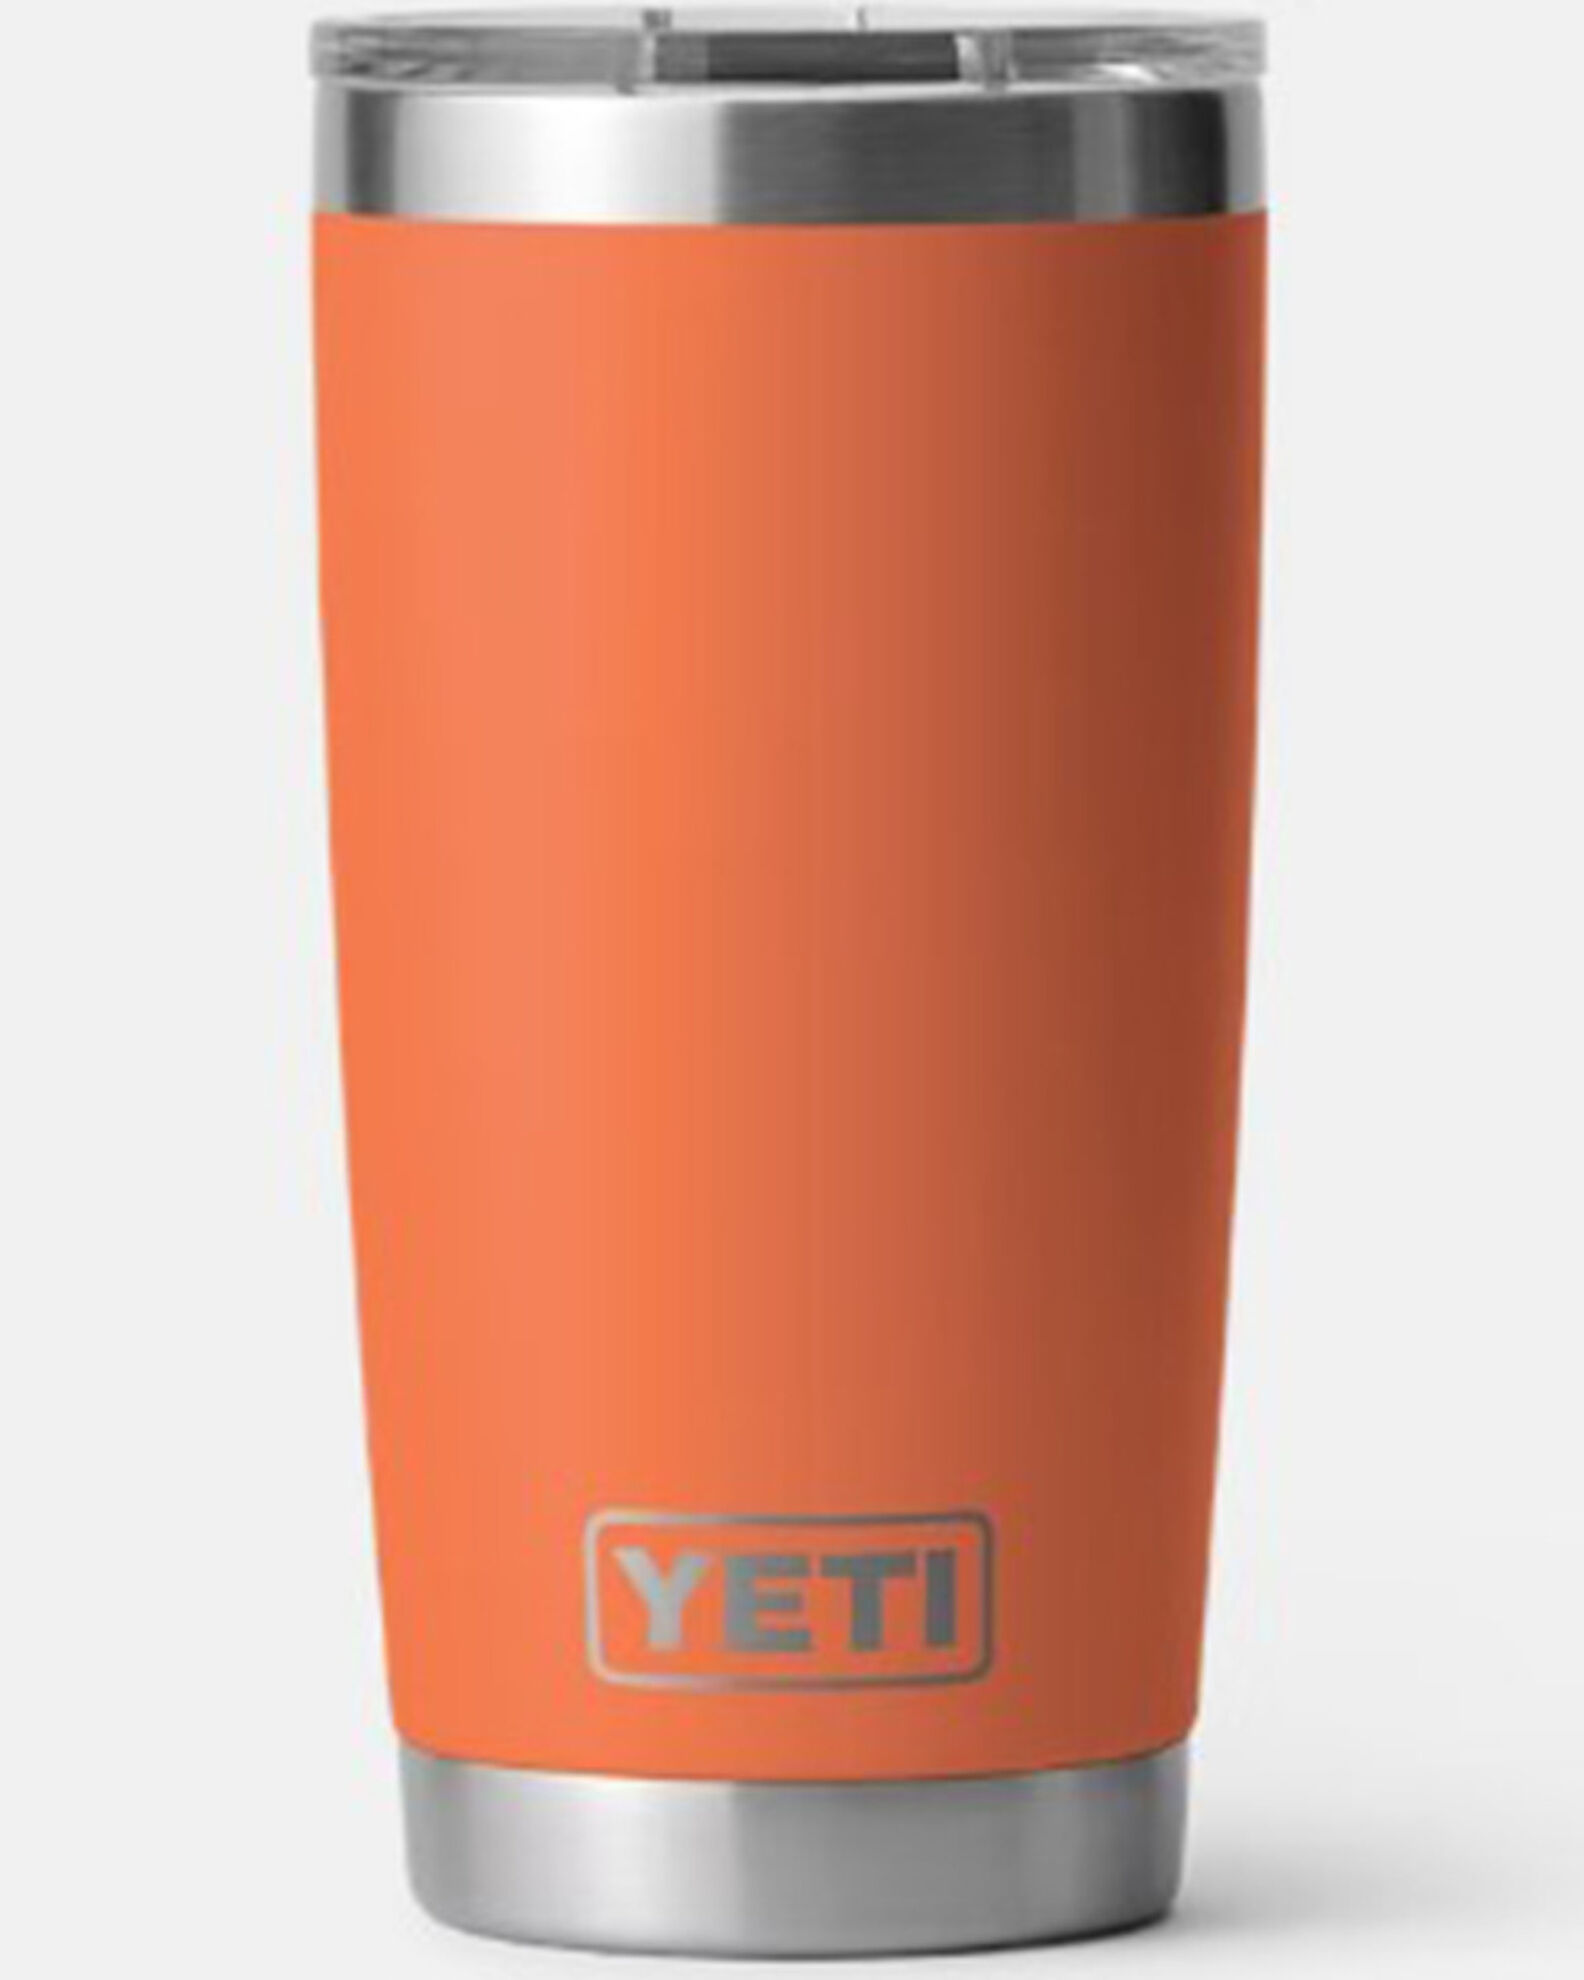 Yeti's New Canopy and High Desert Clay Colors Are Perfect for